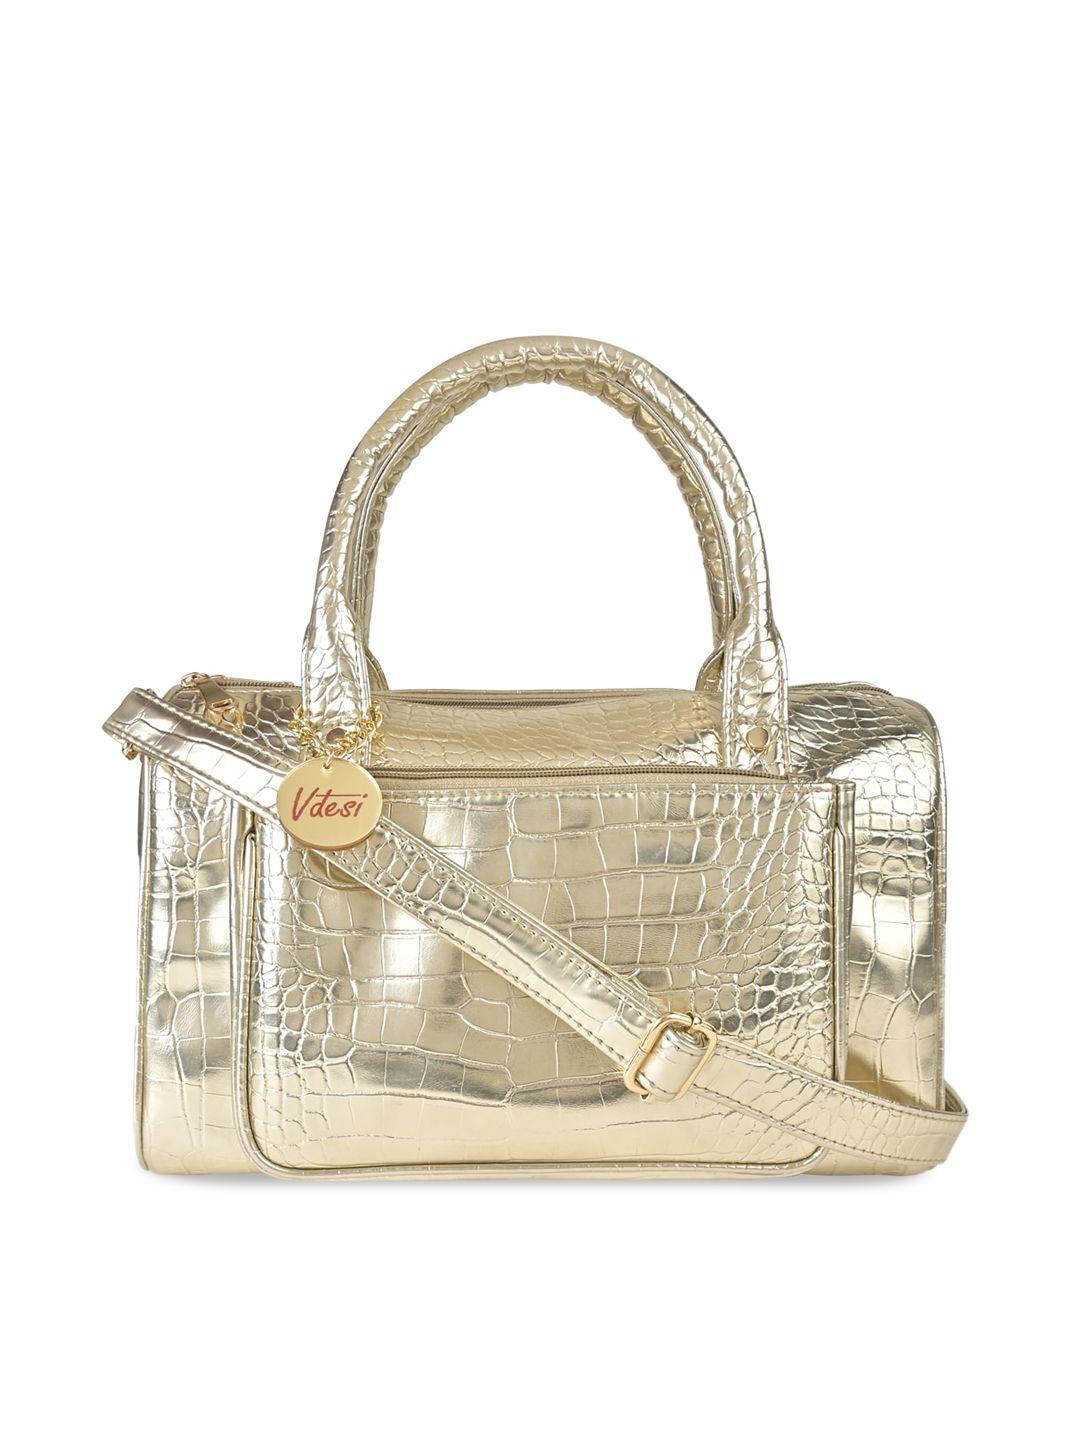 vdesi gold-toned textured pu structured handheld bag